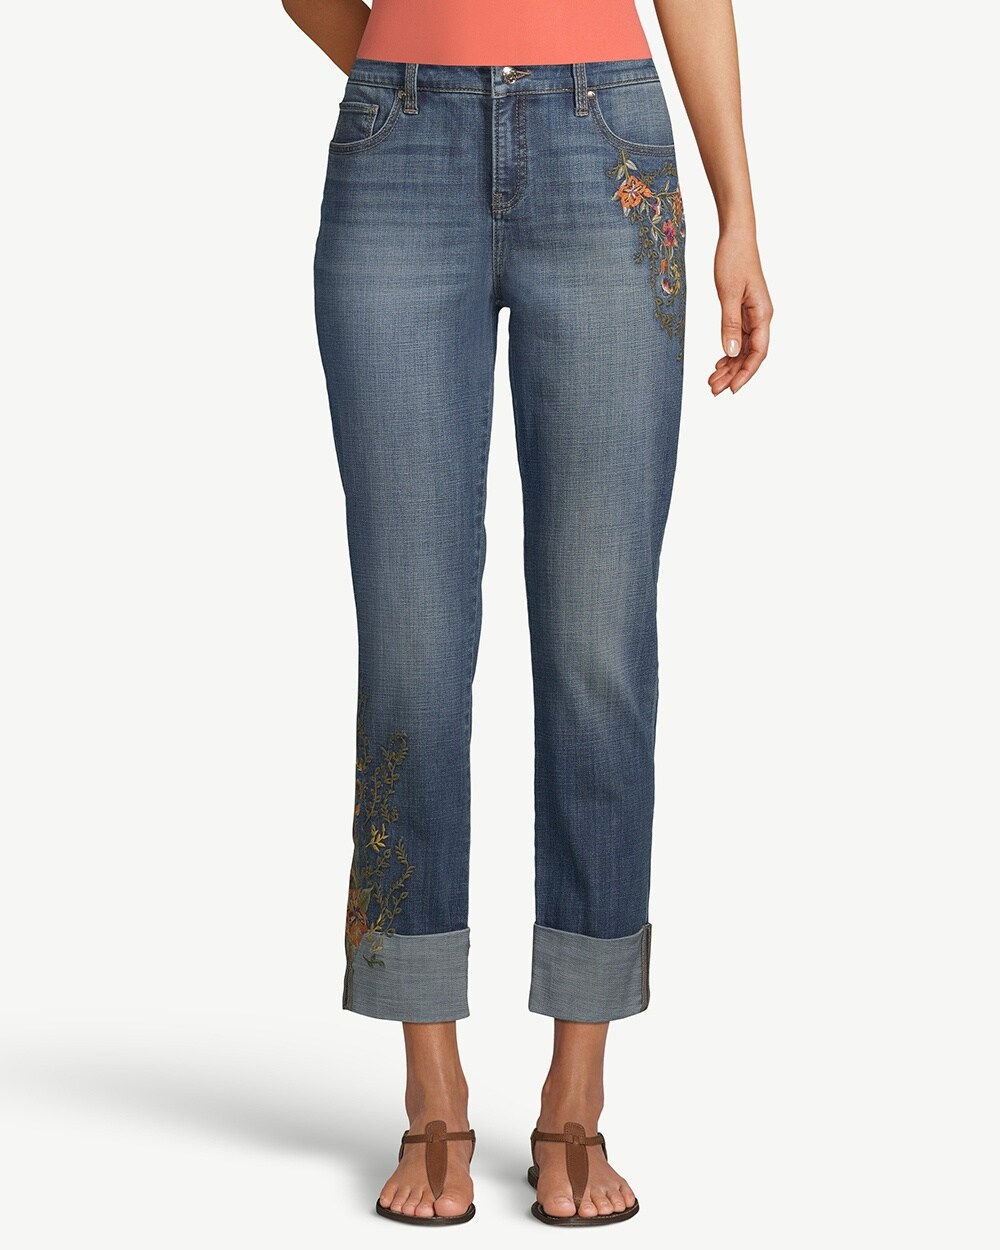 chico's so slimming girlfriend jeans